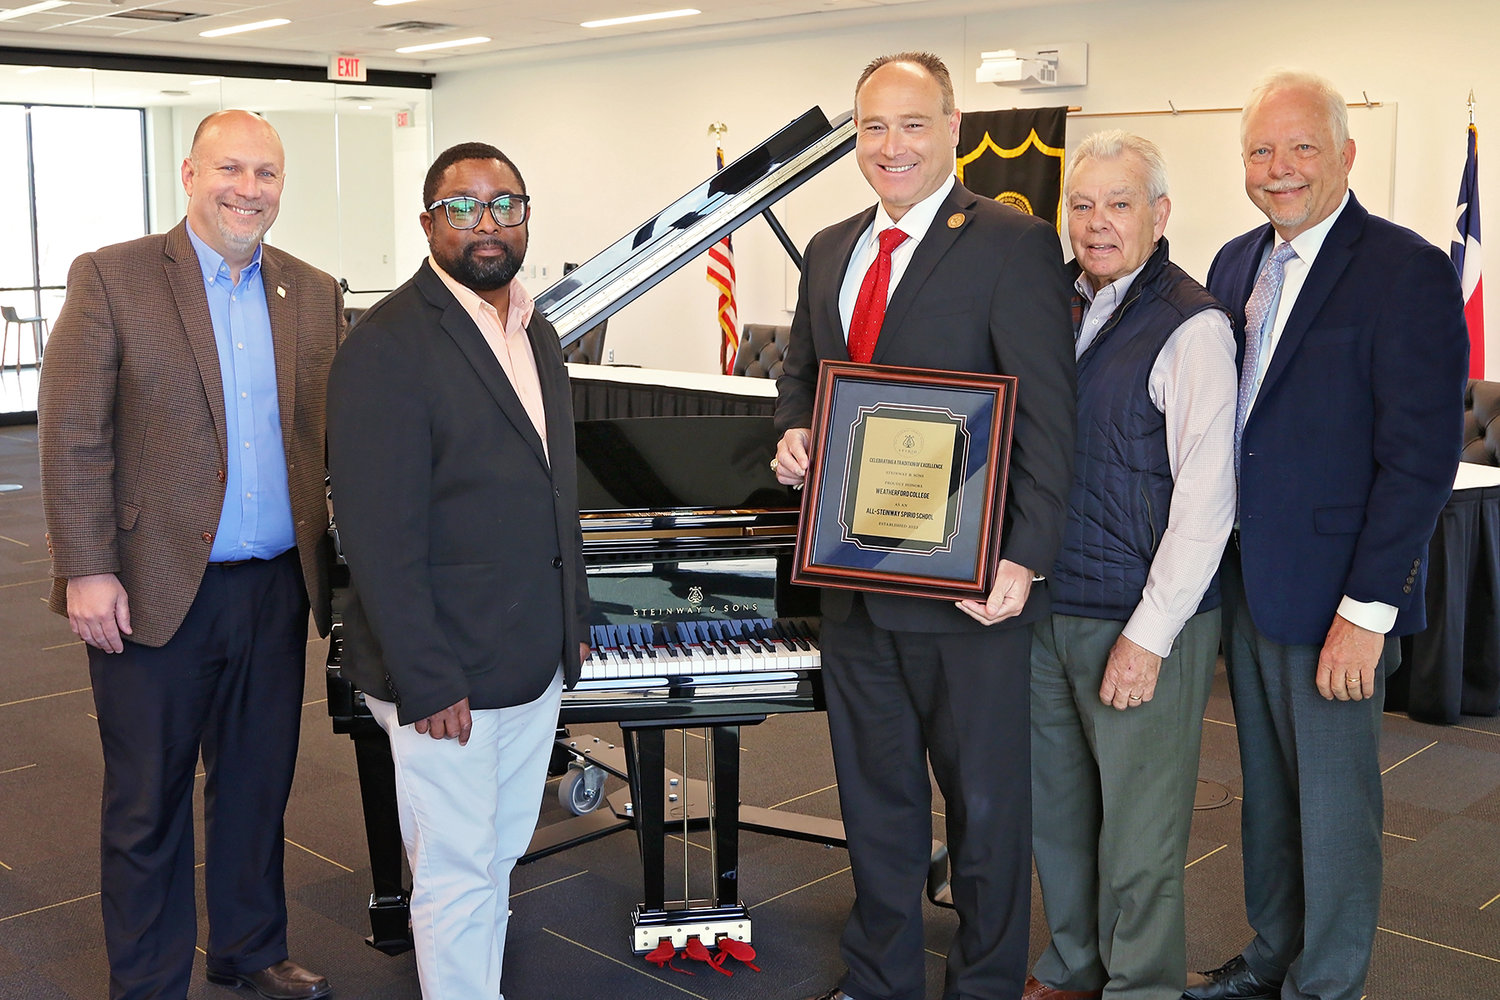 From left: Brent Baker, Vice President of Institutional Advancement; Frederick Sanders, director of the WC Jazz Orchestra; Dr. Tod Allen Farmer, WC President; Duane Durrett, WC's dean of fine arts; and Bryan Elmore, director of institutional sales and services with Steinway & Sons